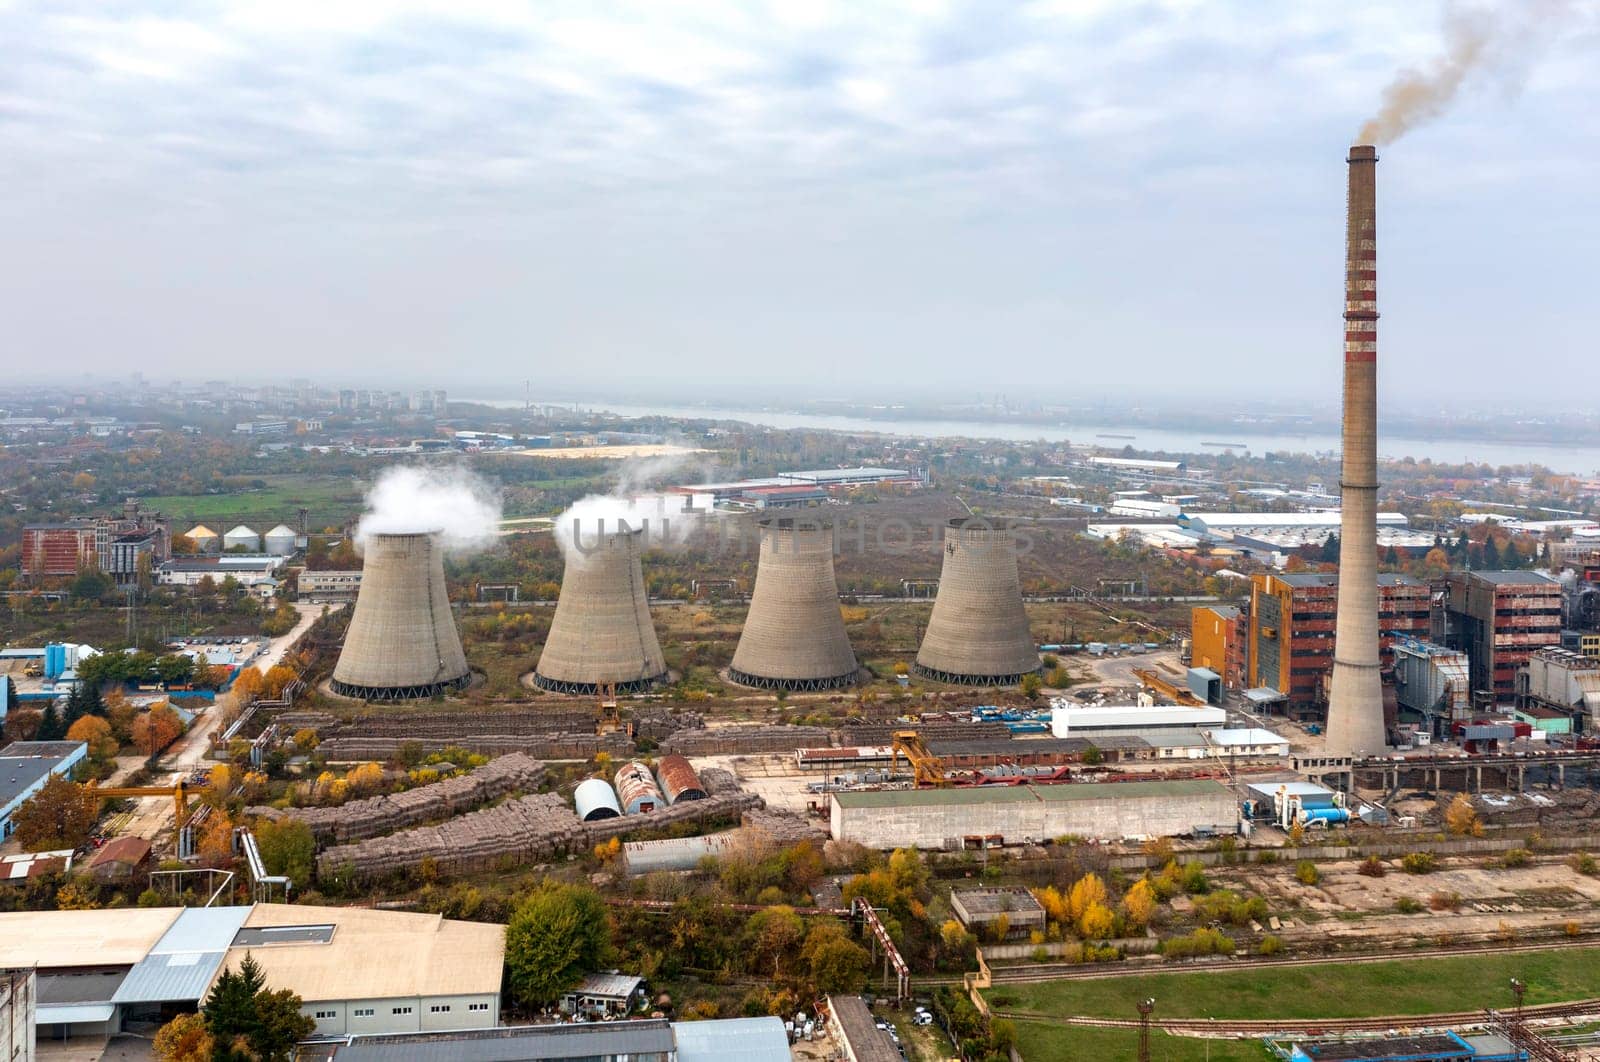 Aerial View Of Large Chimneys From The Coal Power Plant 